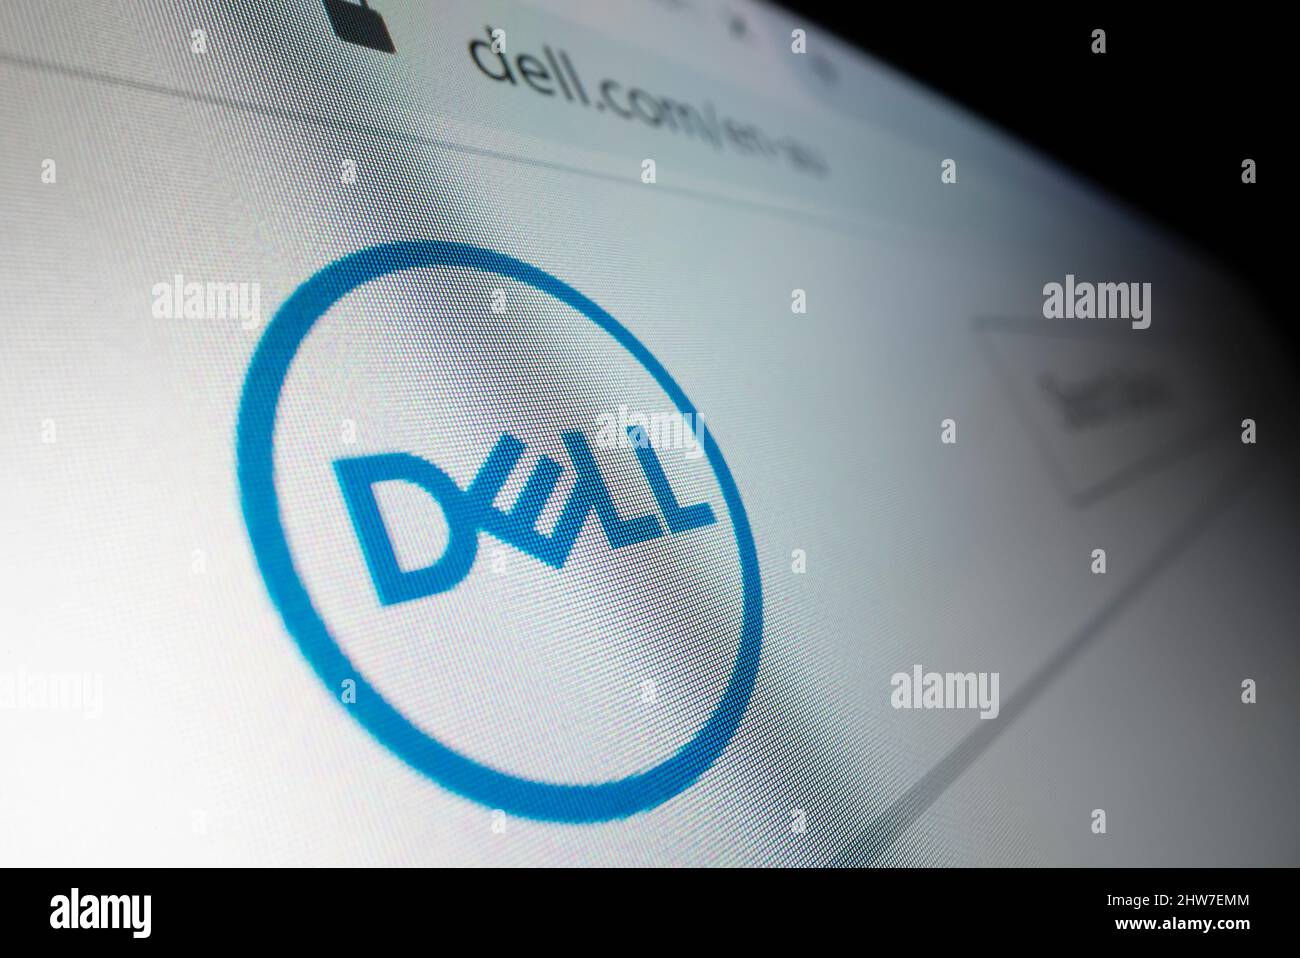 Melbourne, Australia - Jun 8, 2021: Close-up view of Dell logo on its website, shot with macro probe lens. Stock Photo